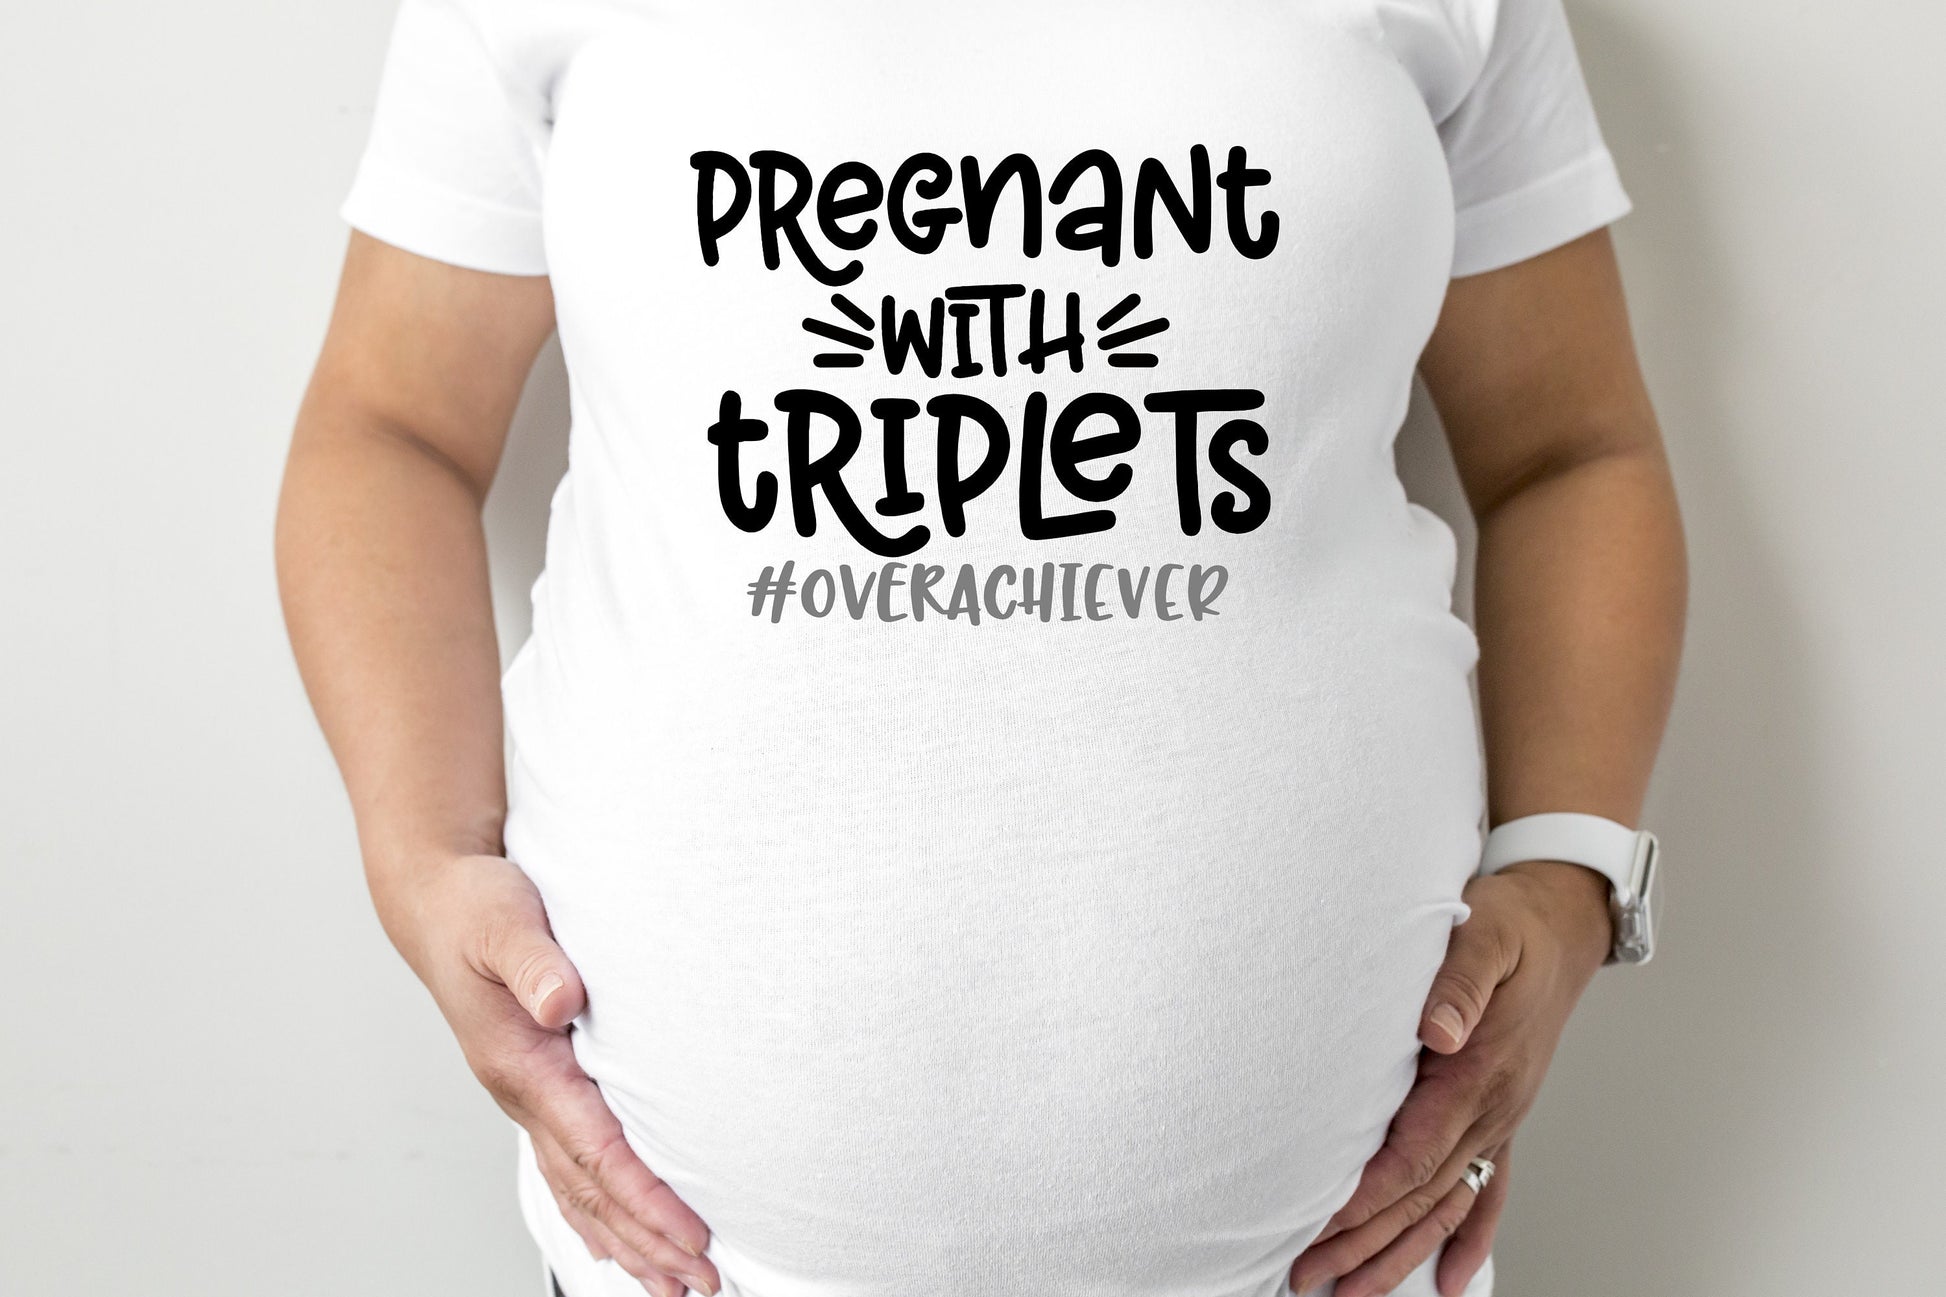 Pregnant With Triplets Overachiever Maternity T-Shirt - maternity cut shirt with ruched sides - pregnancy announcement - funny maternity tee